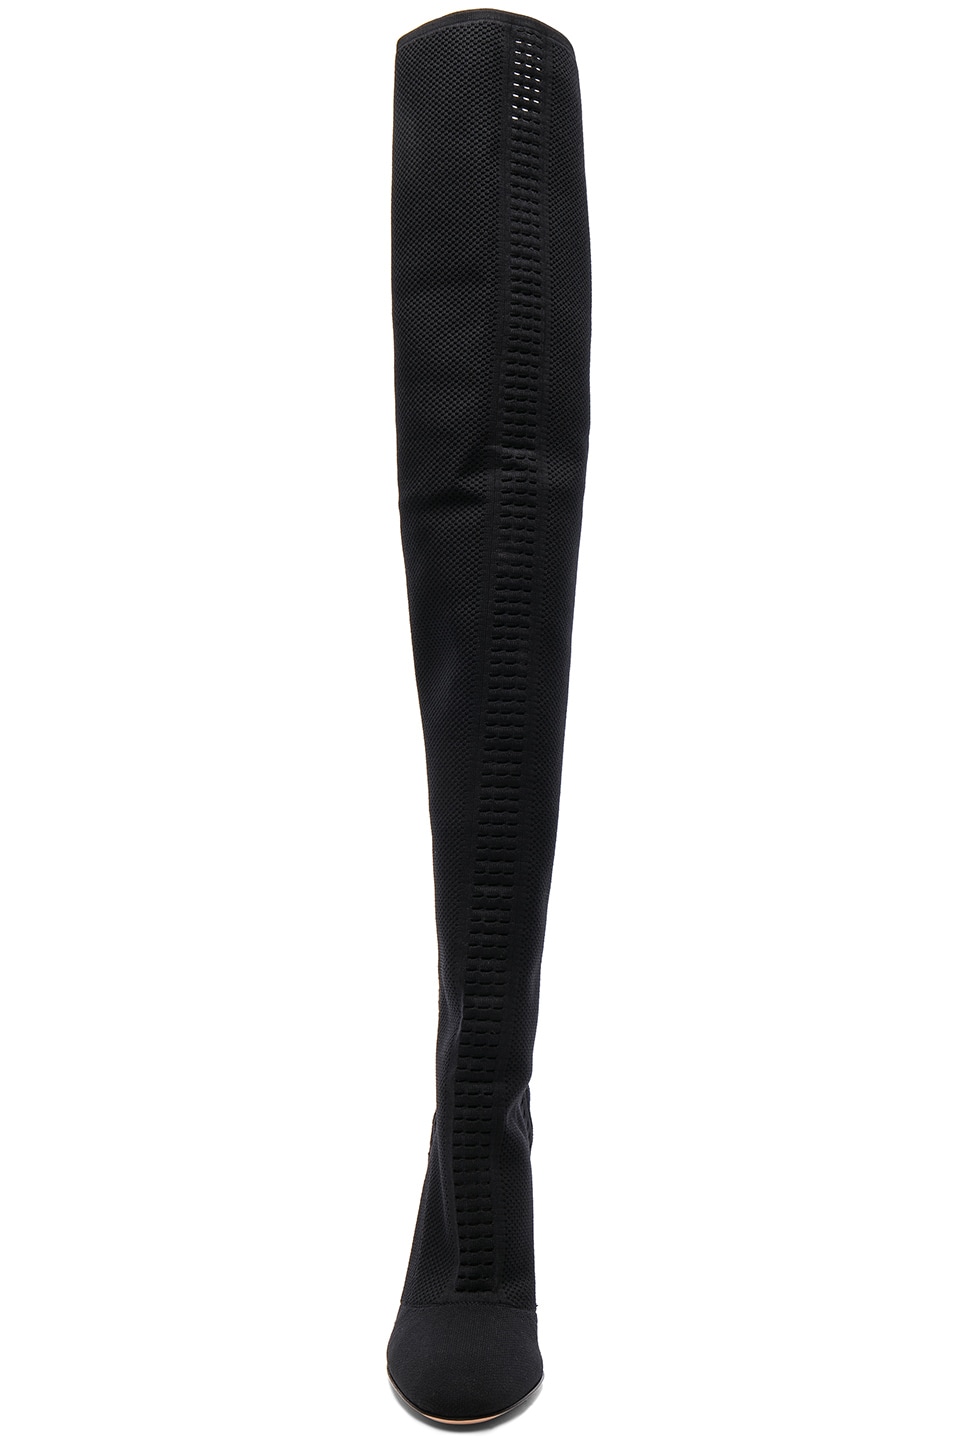 GIANVITO ROSSI Thurlow Cuissard Knit Over-The-Knee 105Mm Boot, Black ...